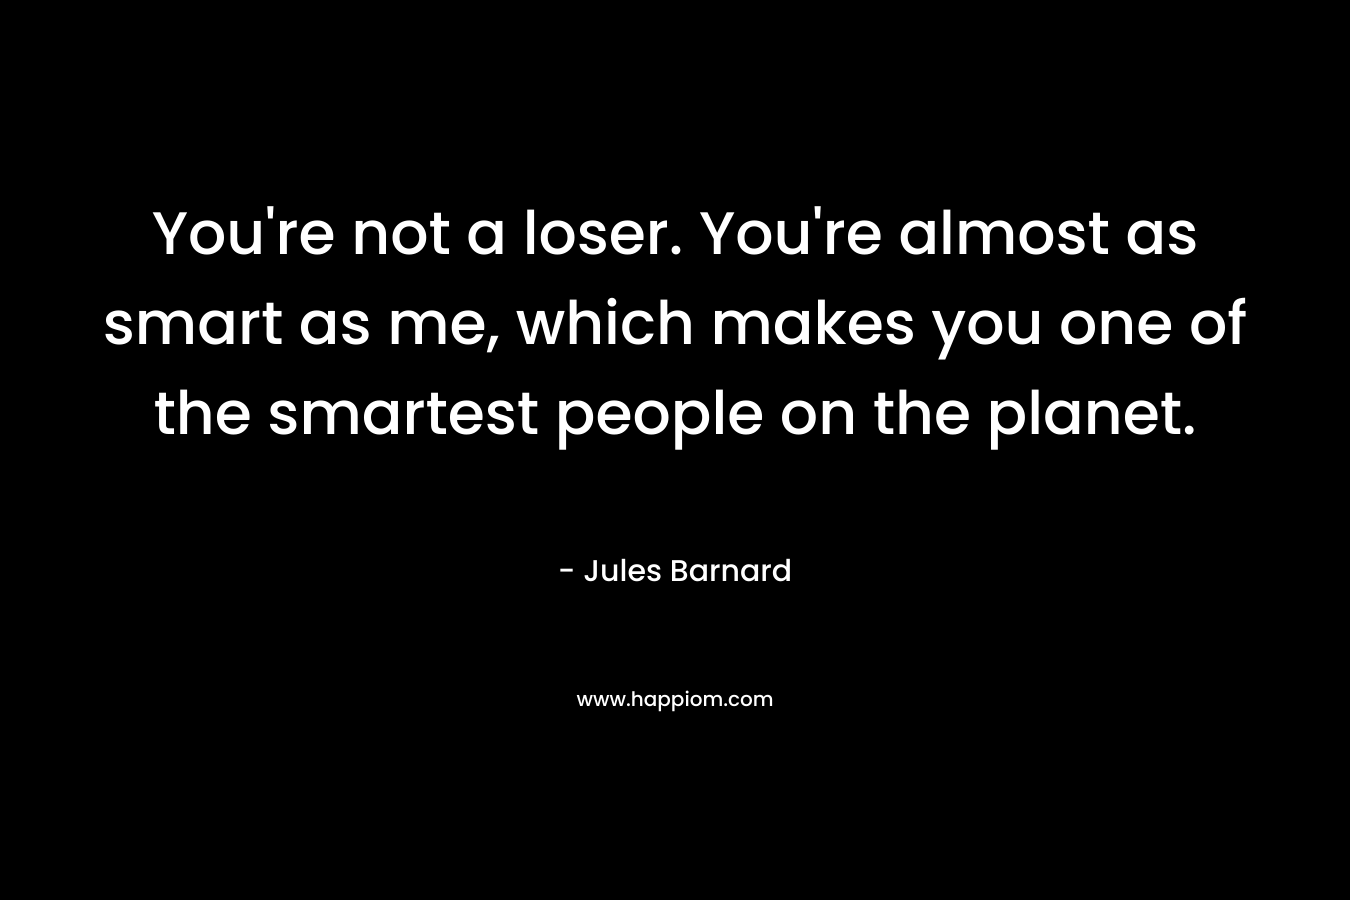 You’re not a loser. You’re almost as smart as me, which makes you one of the smartest people on the planet. – Jules Barnard